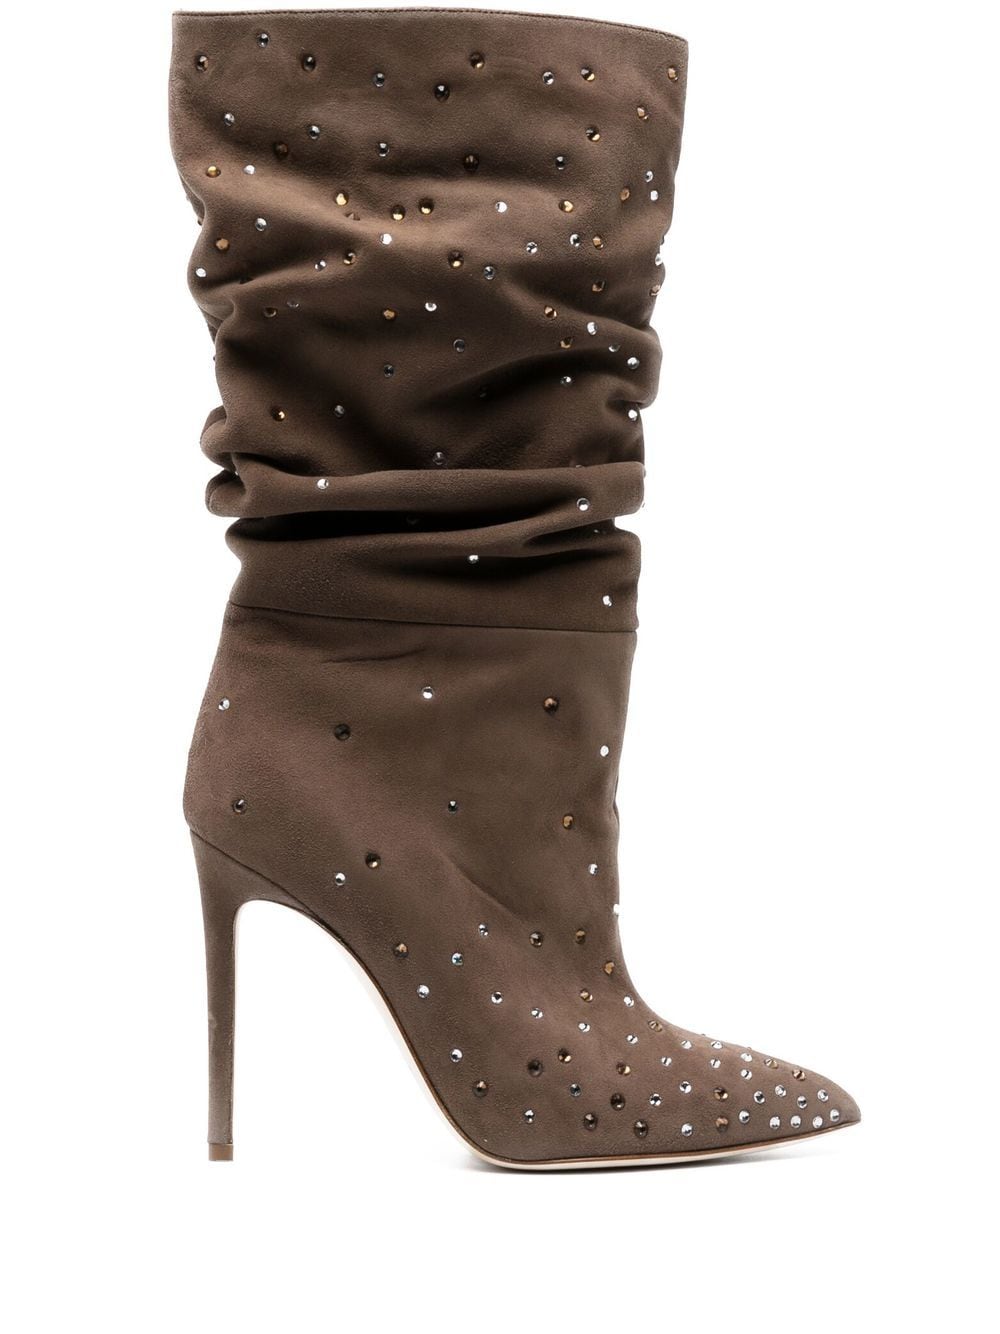 rhinestone-embellished 105mm boots Profile Picture